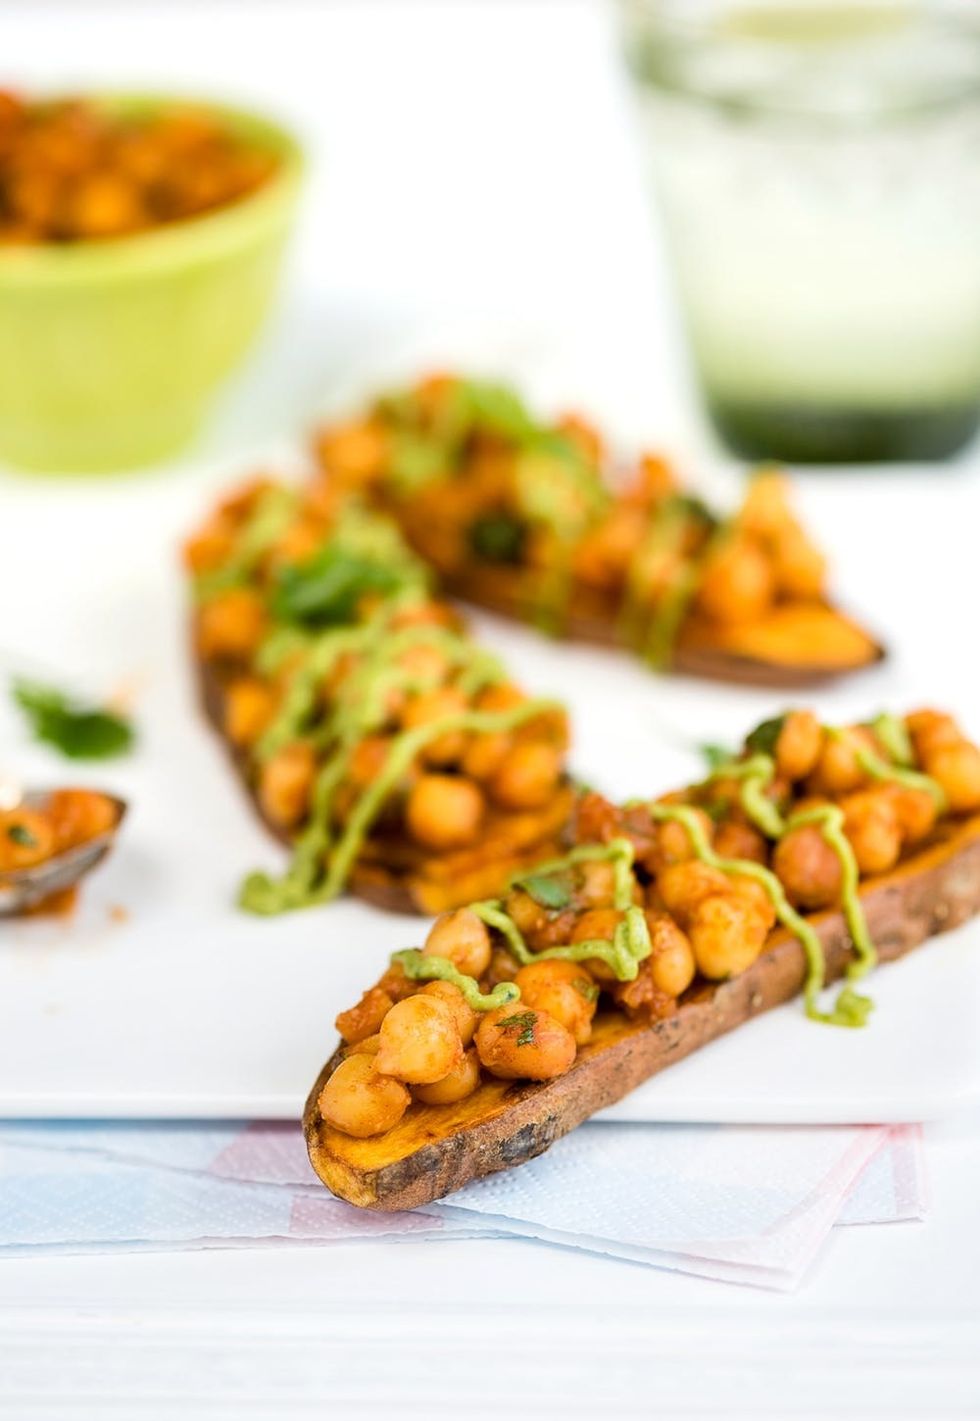 Sweet potato toast with spicy chickpeas and tangy avocado dressing. Quick, healthy, and delicious!